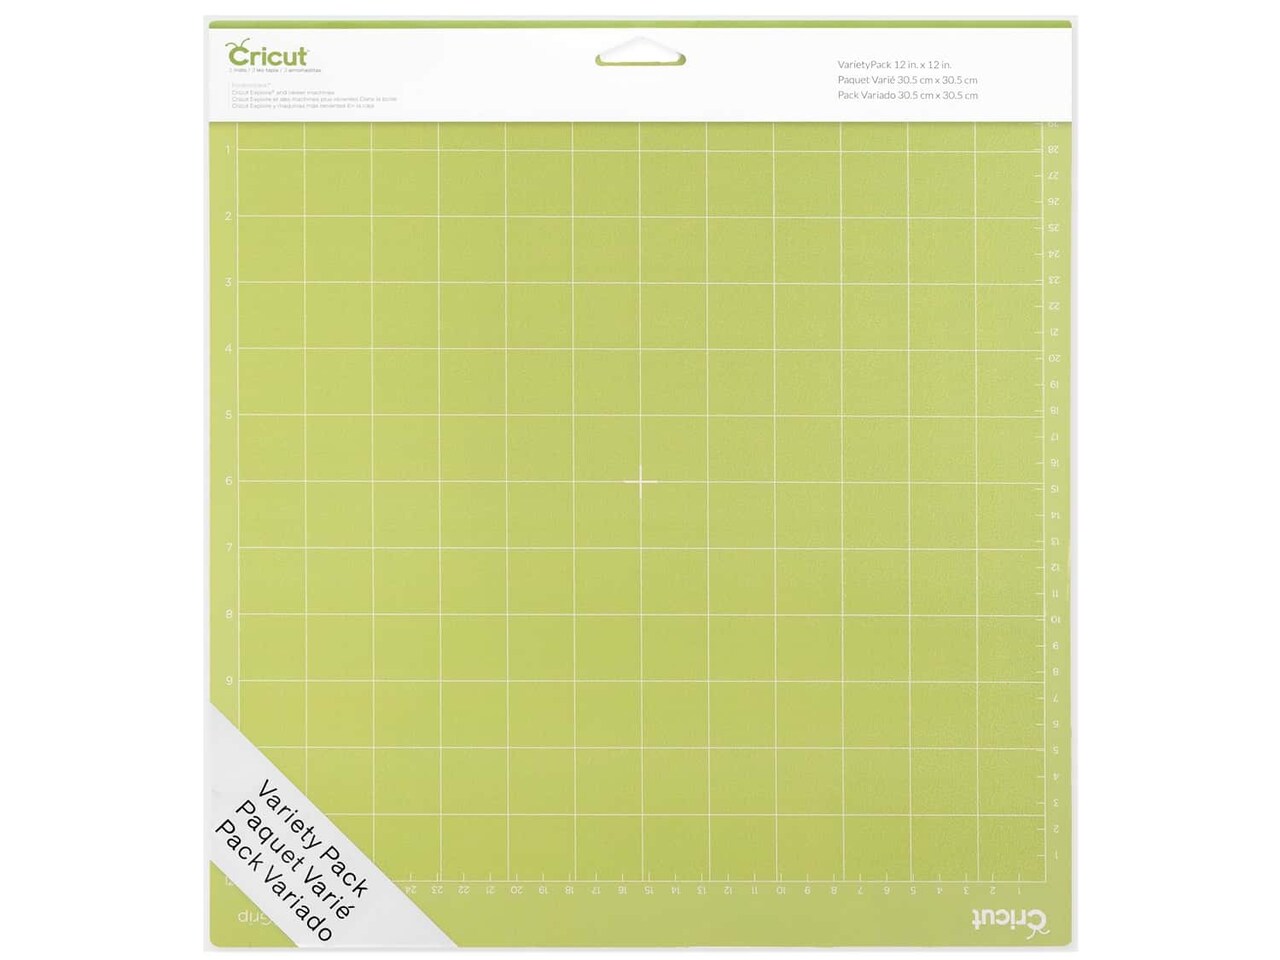 Cricut Maker And Explore Air 2 Accessories Cutting Mat 12 in. x 12 in.  Variety Pack 3 pc